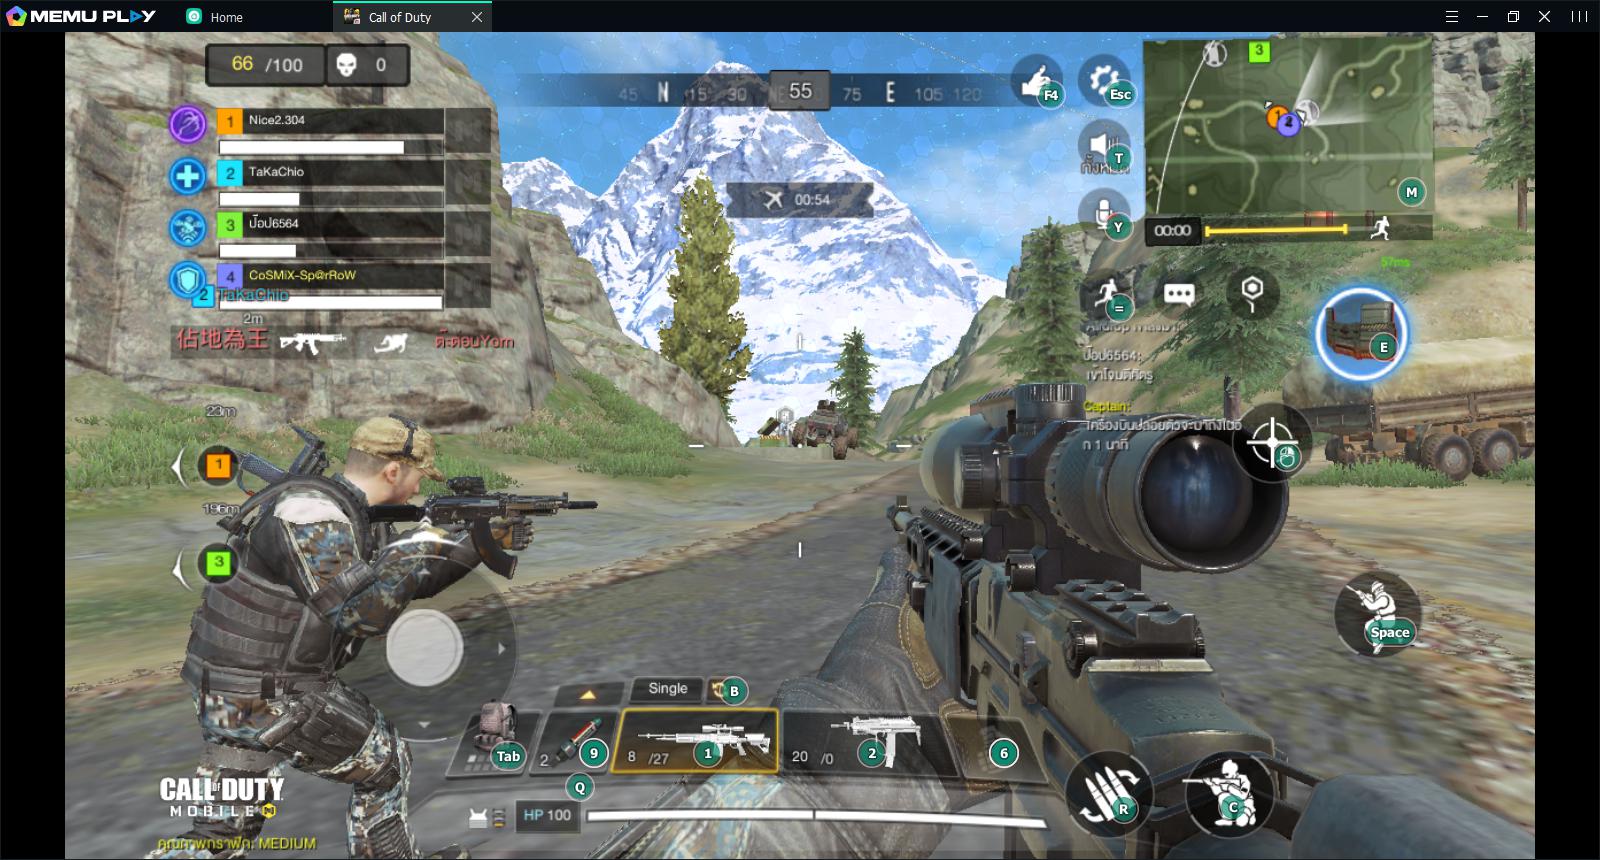 How to Play Call of Duty (CoD) Mobile on PC